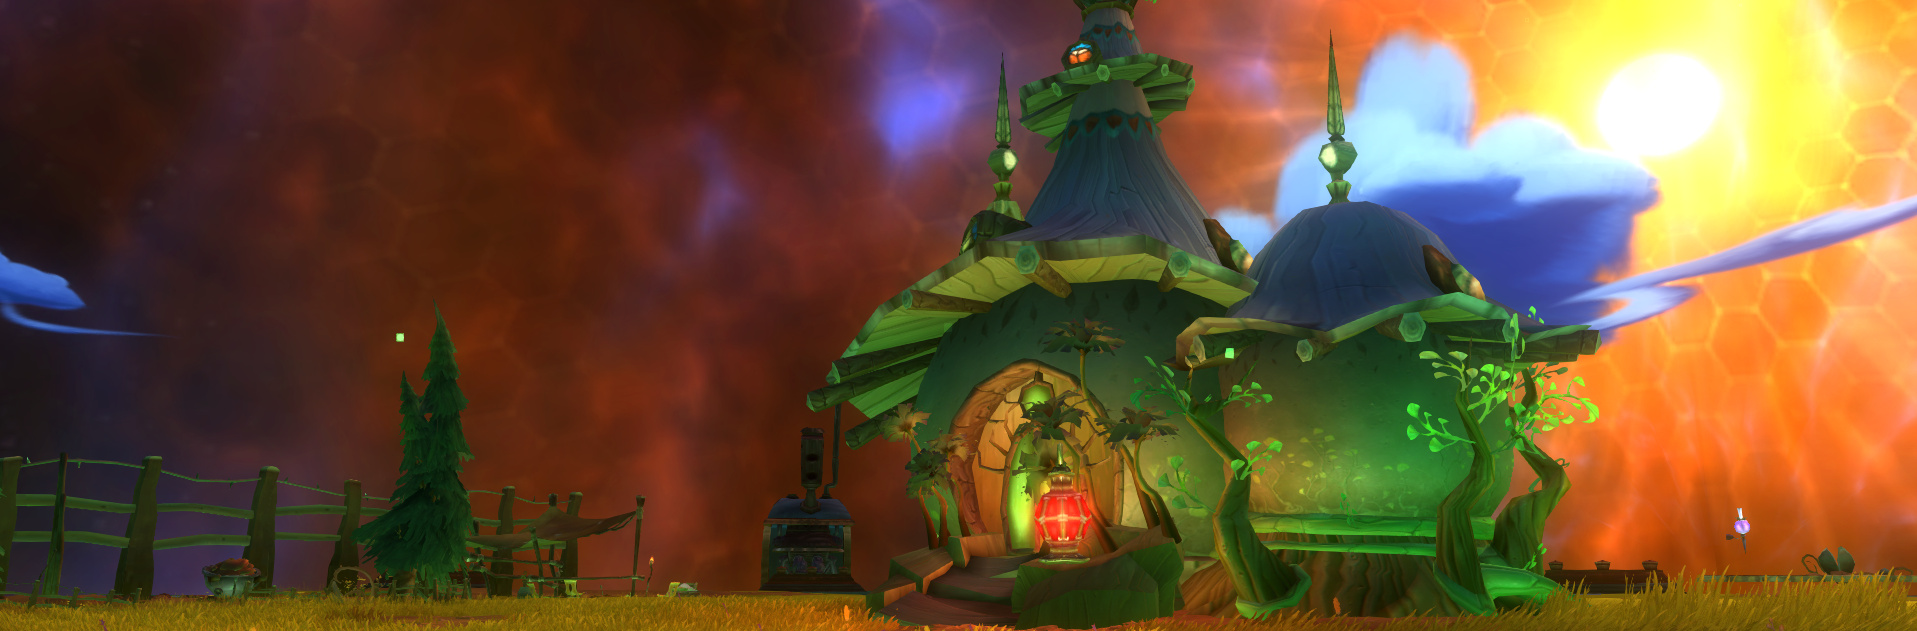 Welcome to the Wildstar Housing system. Prepare to have fun.